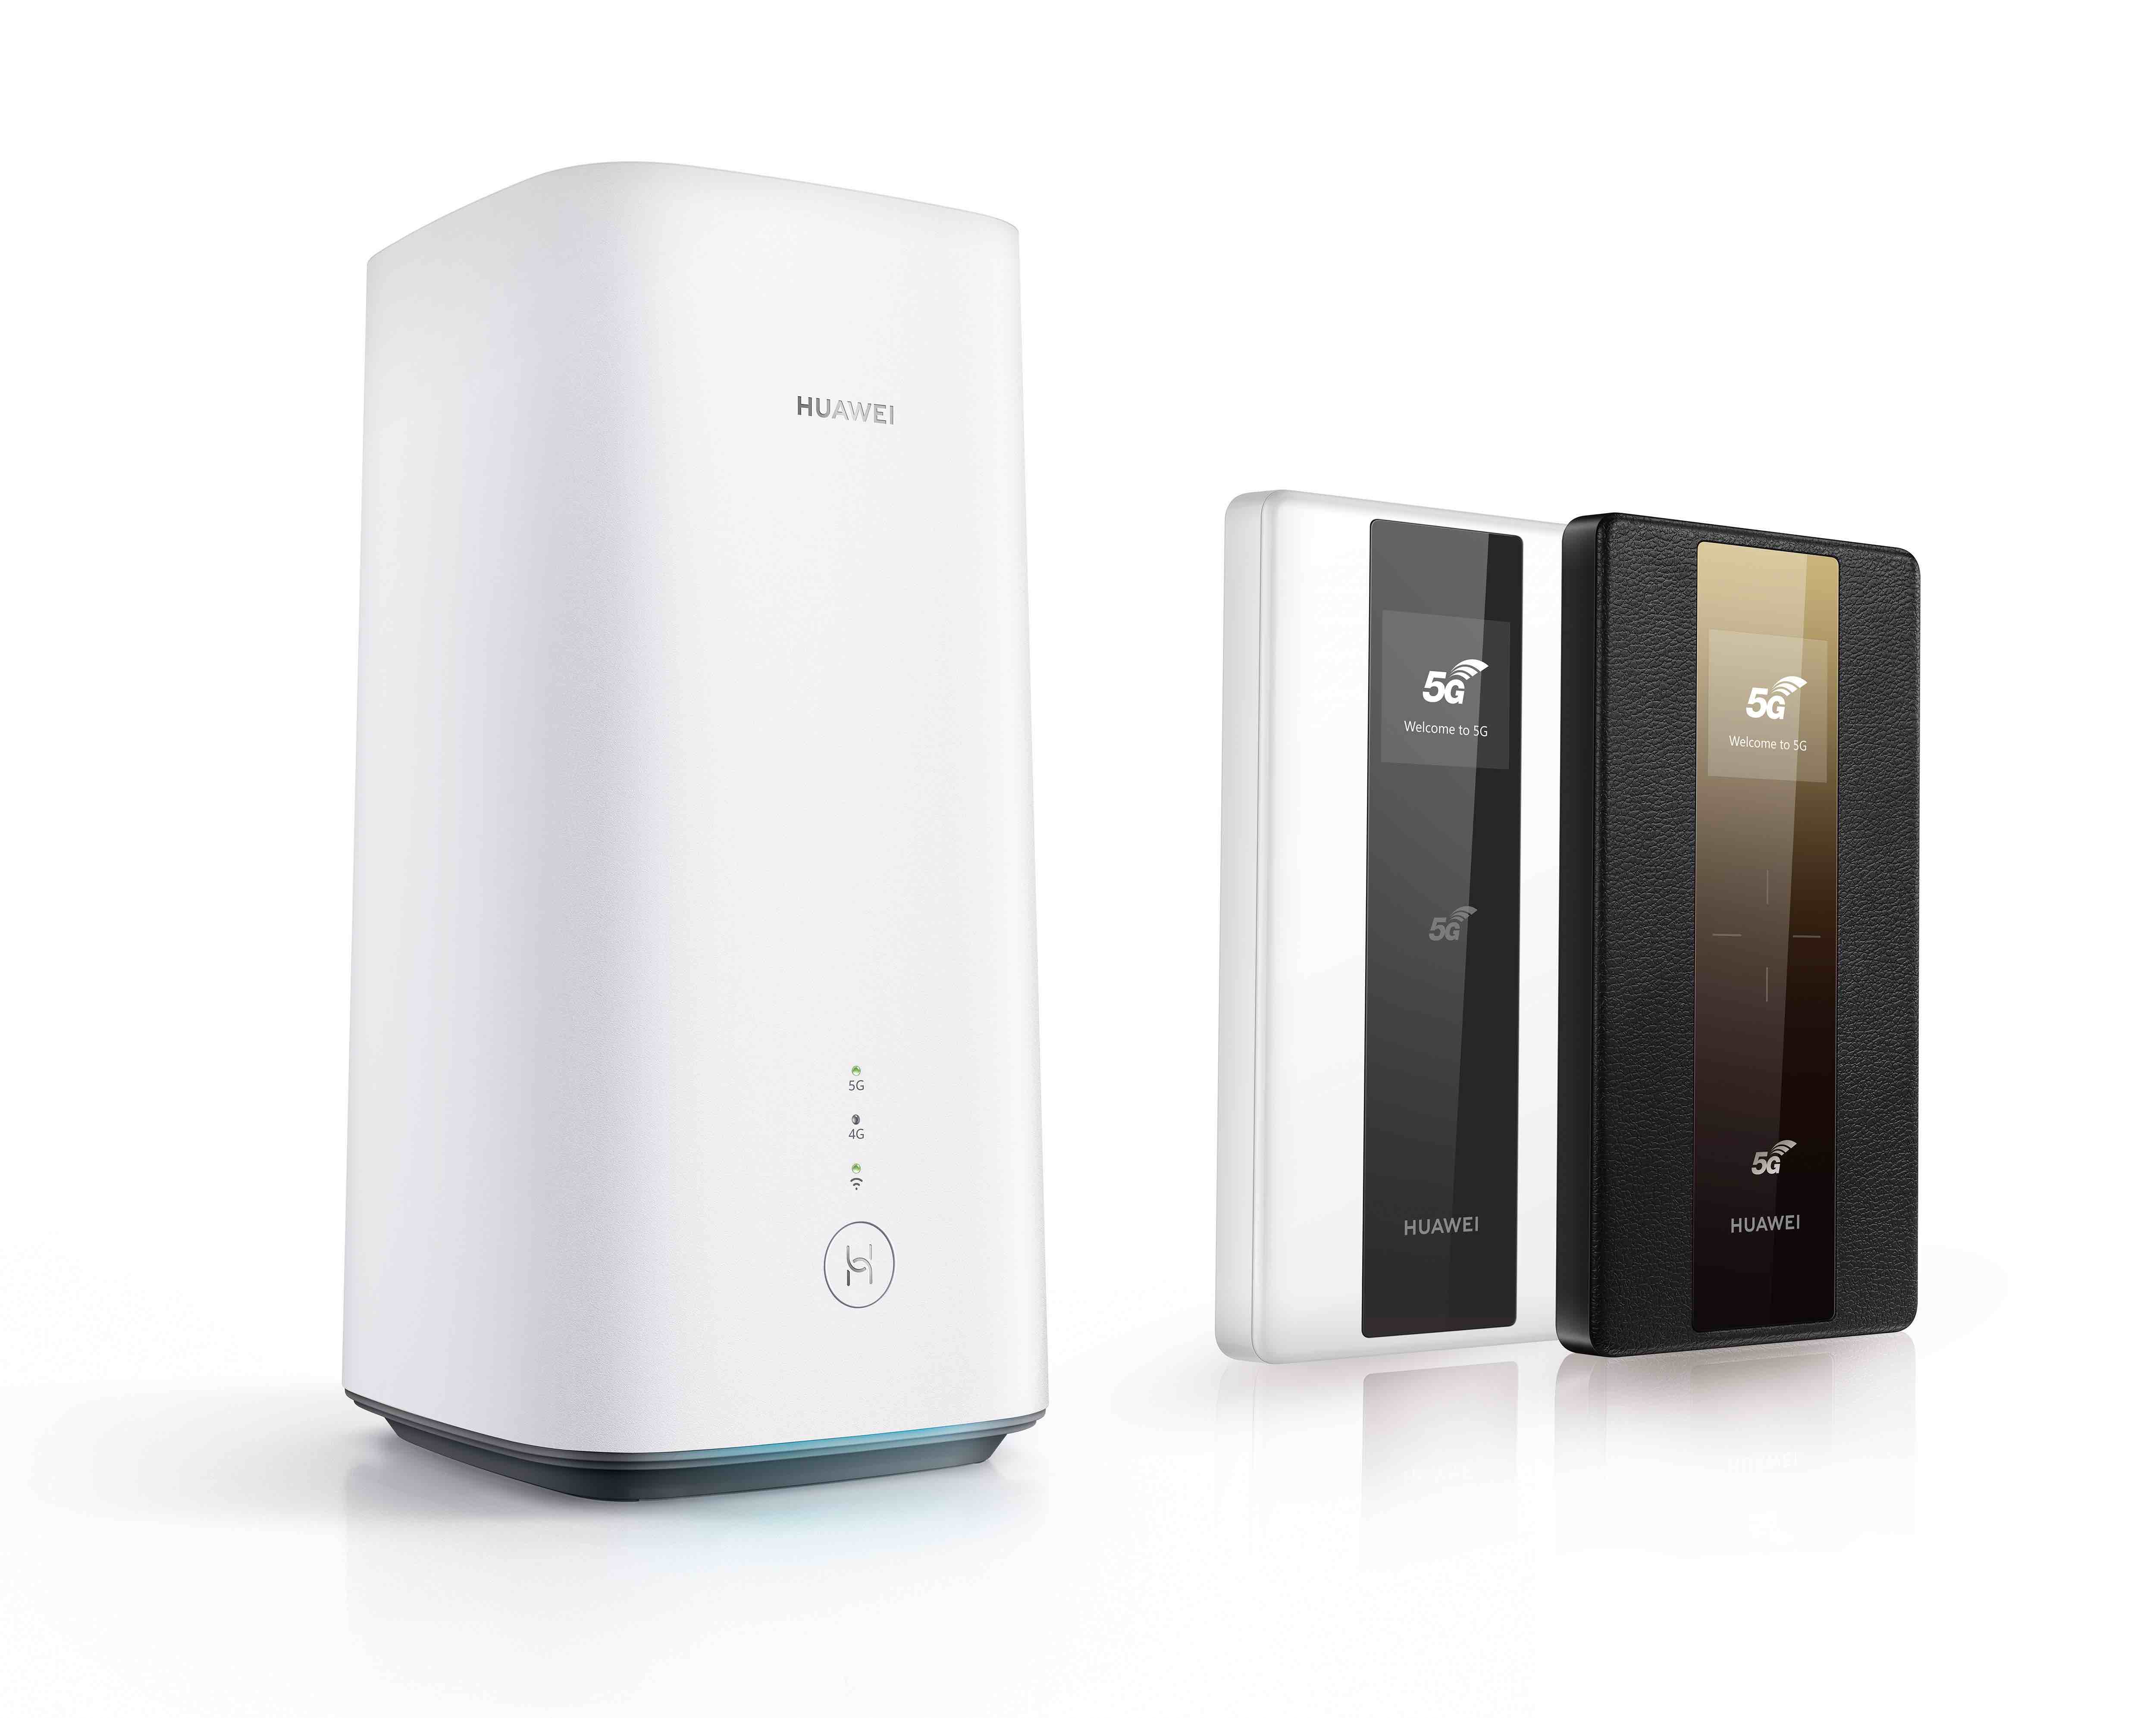 huawei-s-5g-router-series-is-available-now-in-saudi-arabia-asdaf-news